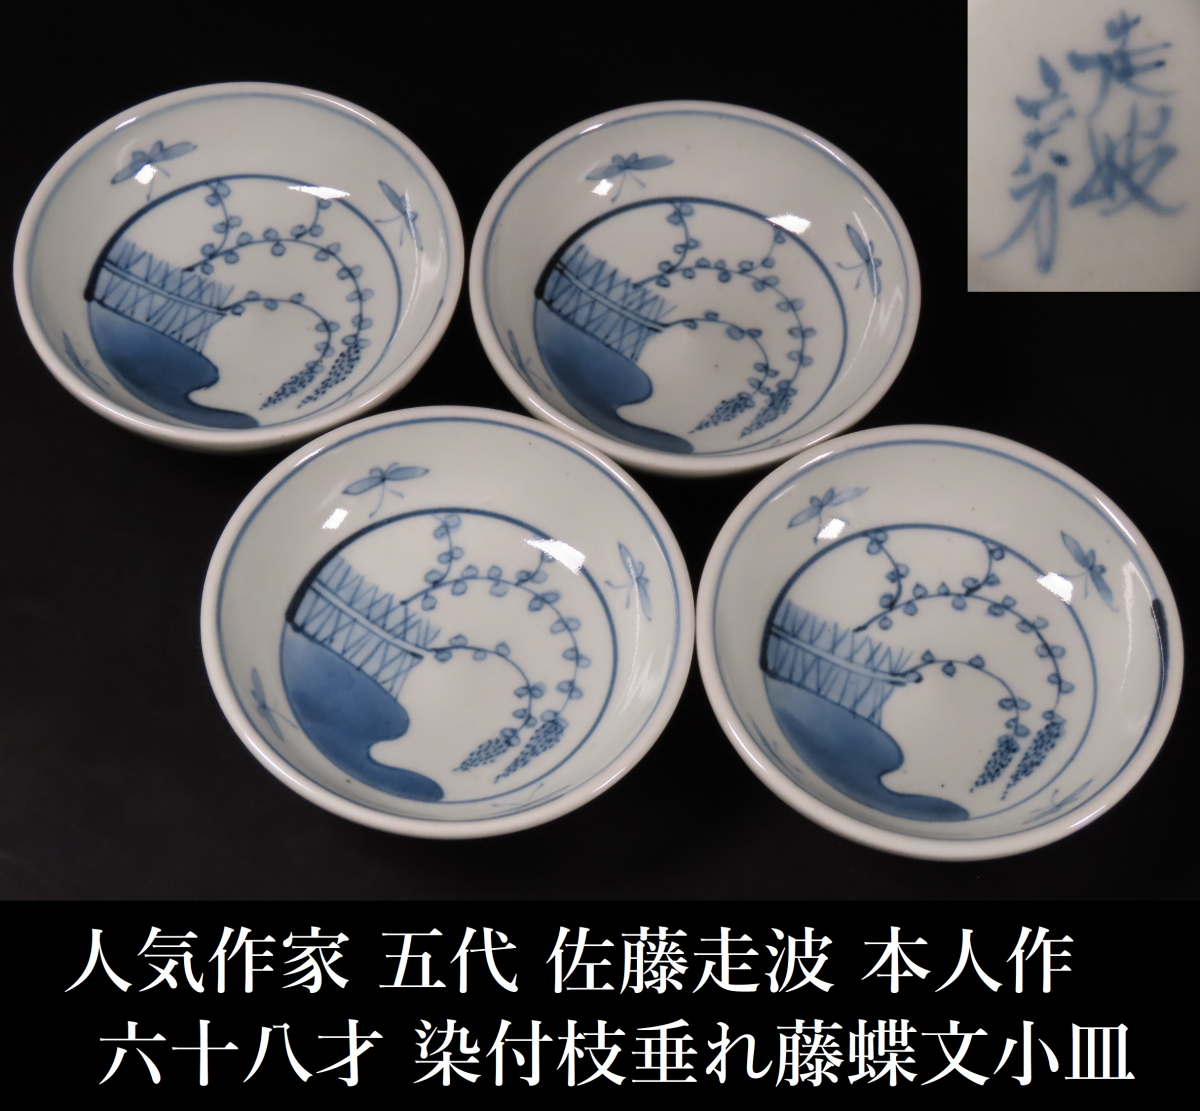 [ONE\'S] popular author . fee Sato mileage wave person himself work six 10 . -years old blue and white ceramics branch shide . wistaria butterfly writing small plate 4 customer . mileage wave . old work of art 